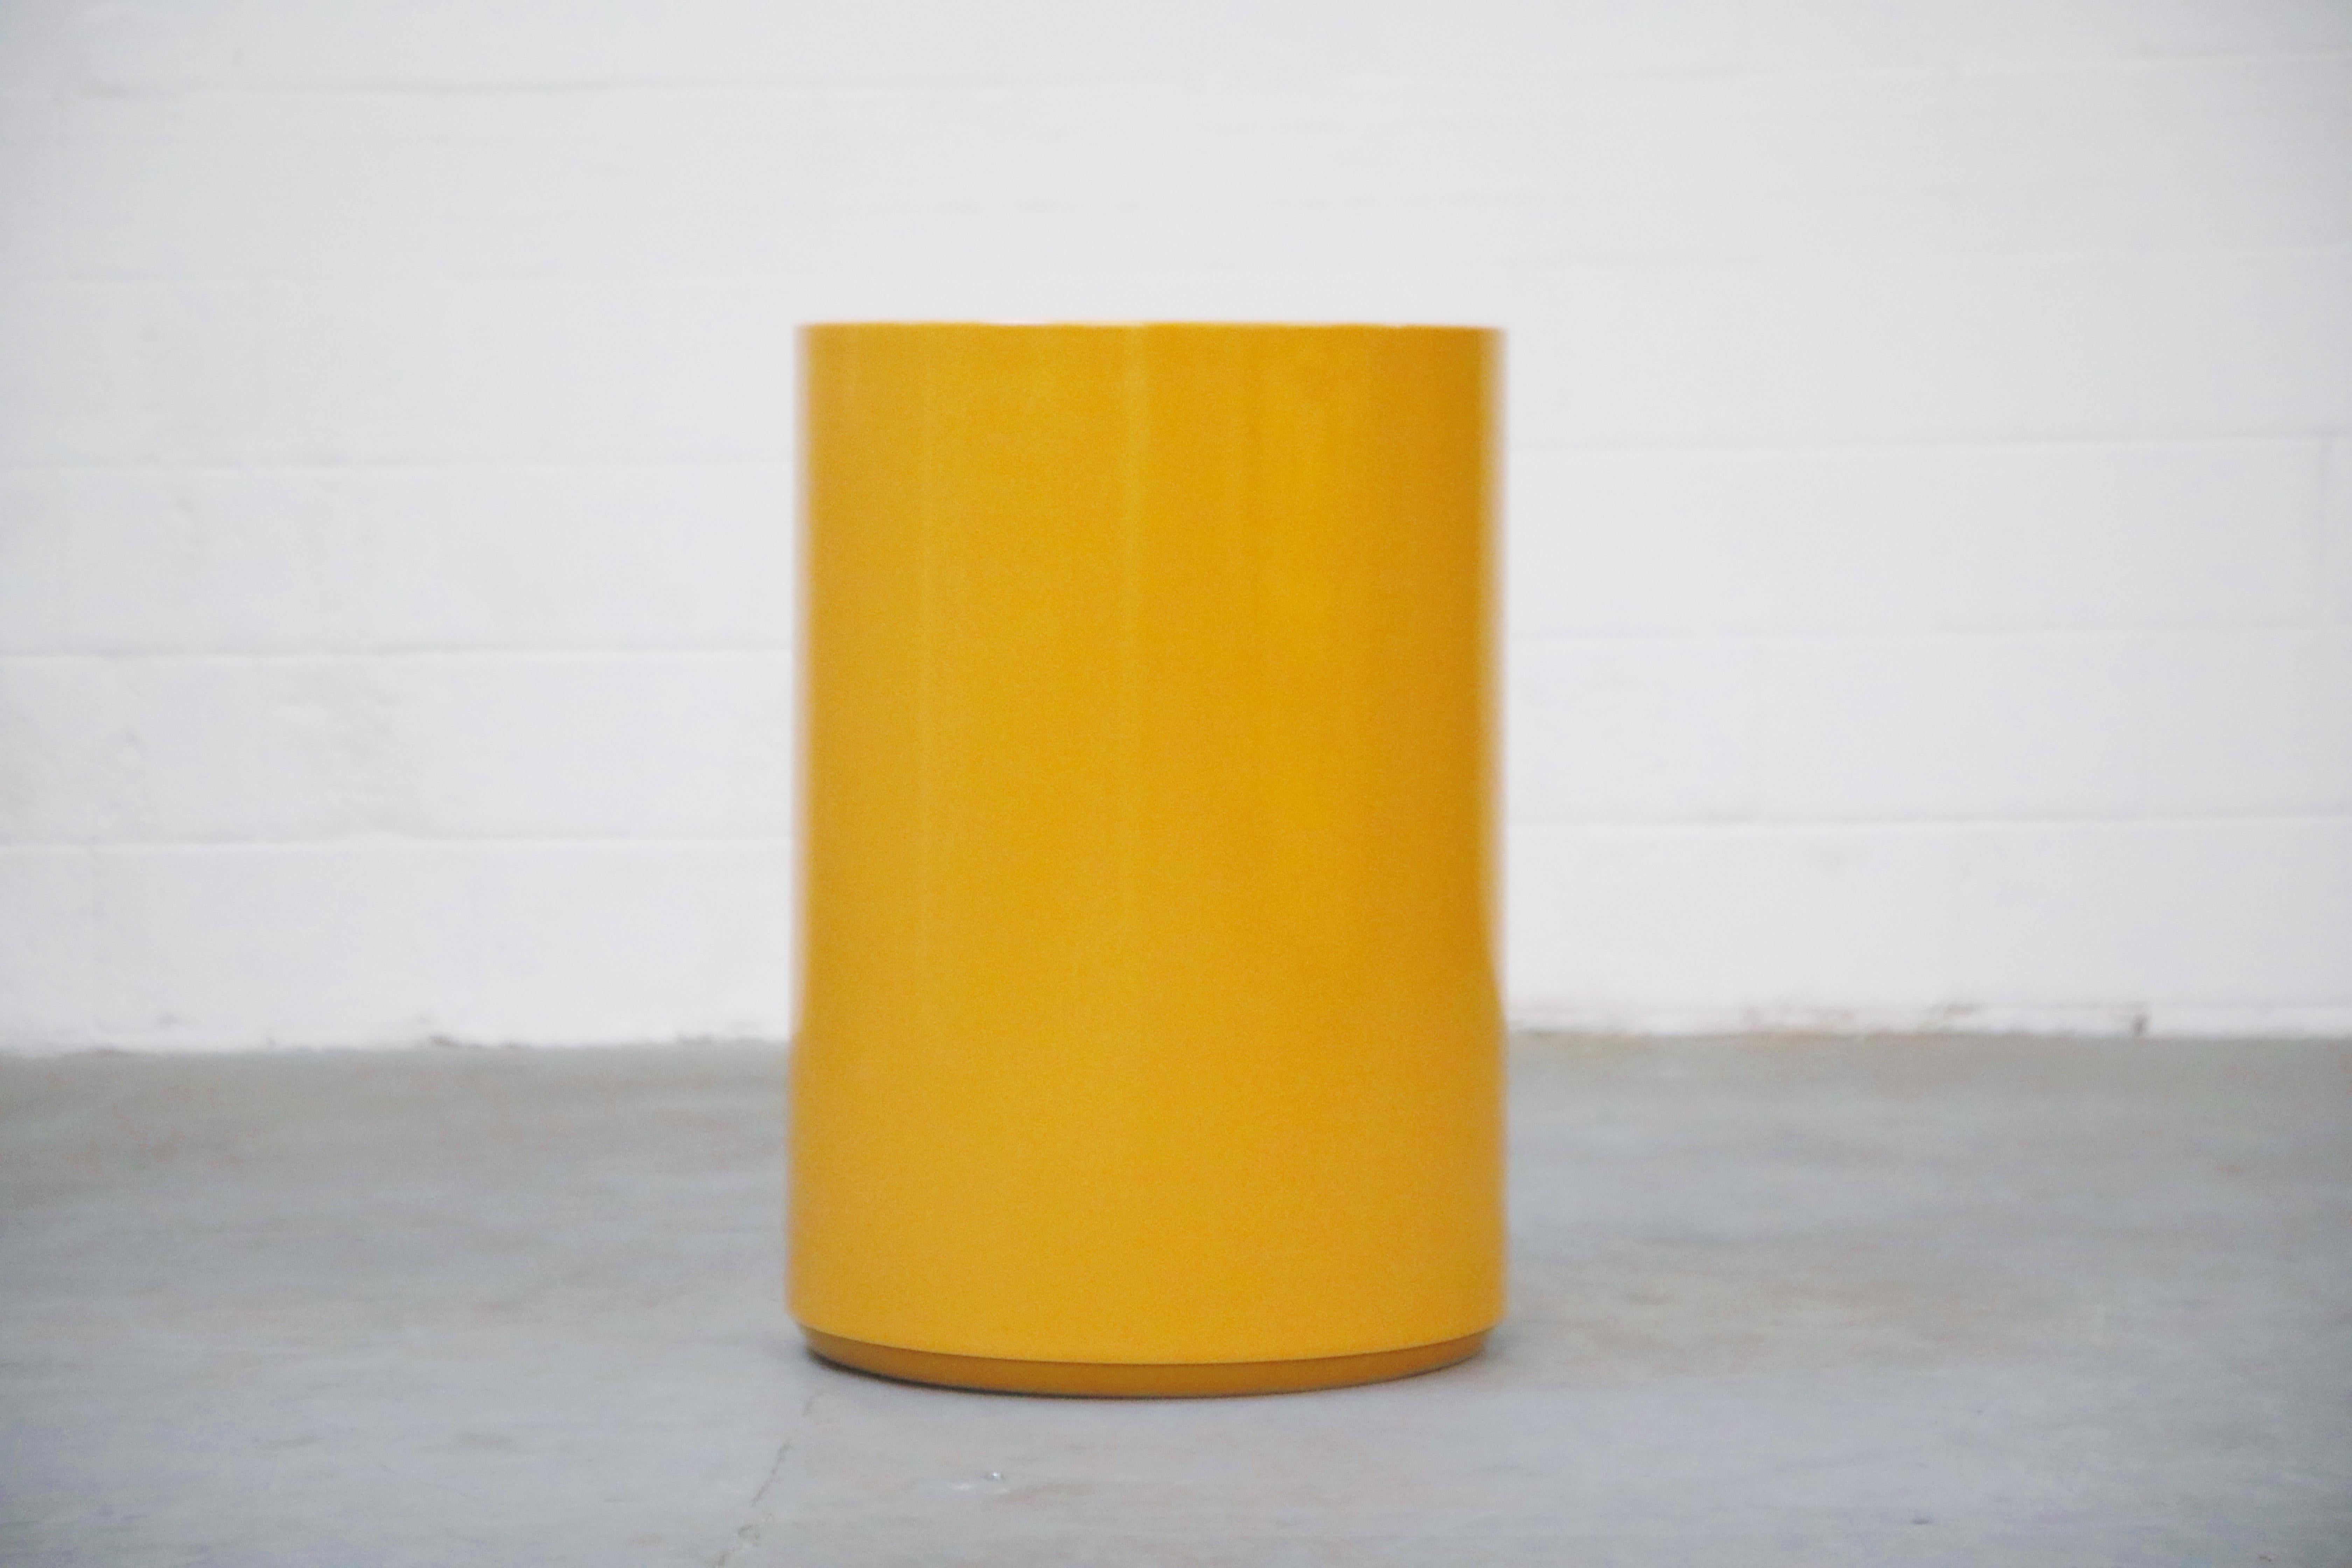 A wonderful high quality piece by Peter Pepper Products, Inc made with Plastiglas, a fiberglass innovation of the 1970s. This collectible Mid-Century Modern side table, which also works great as a display stand for a sculpture or piece of art, is a